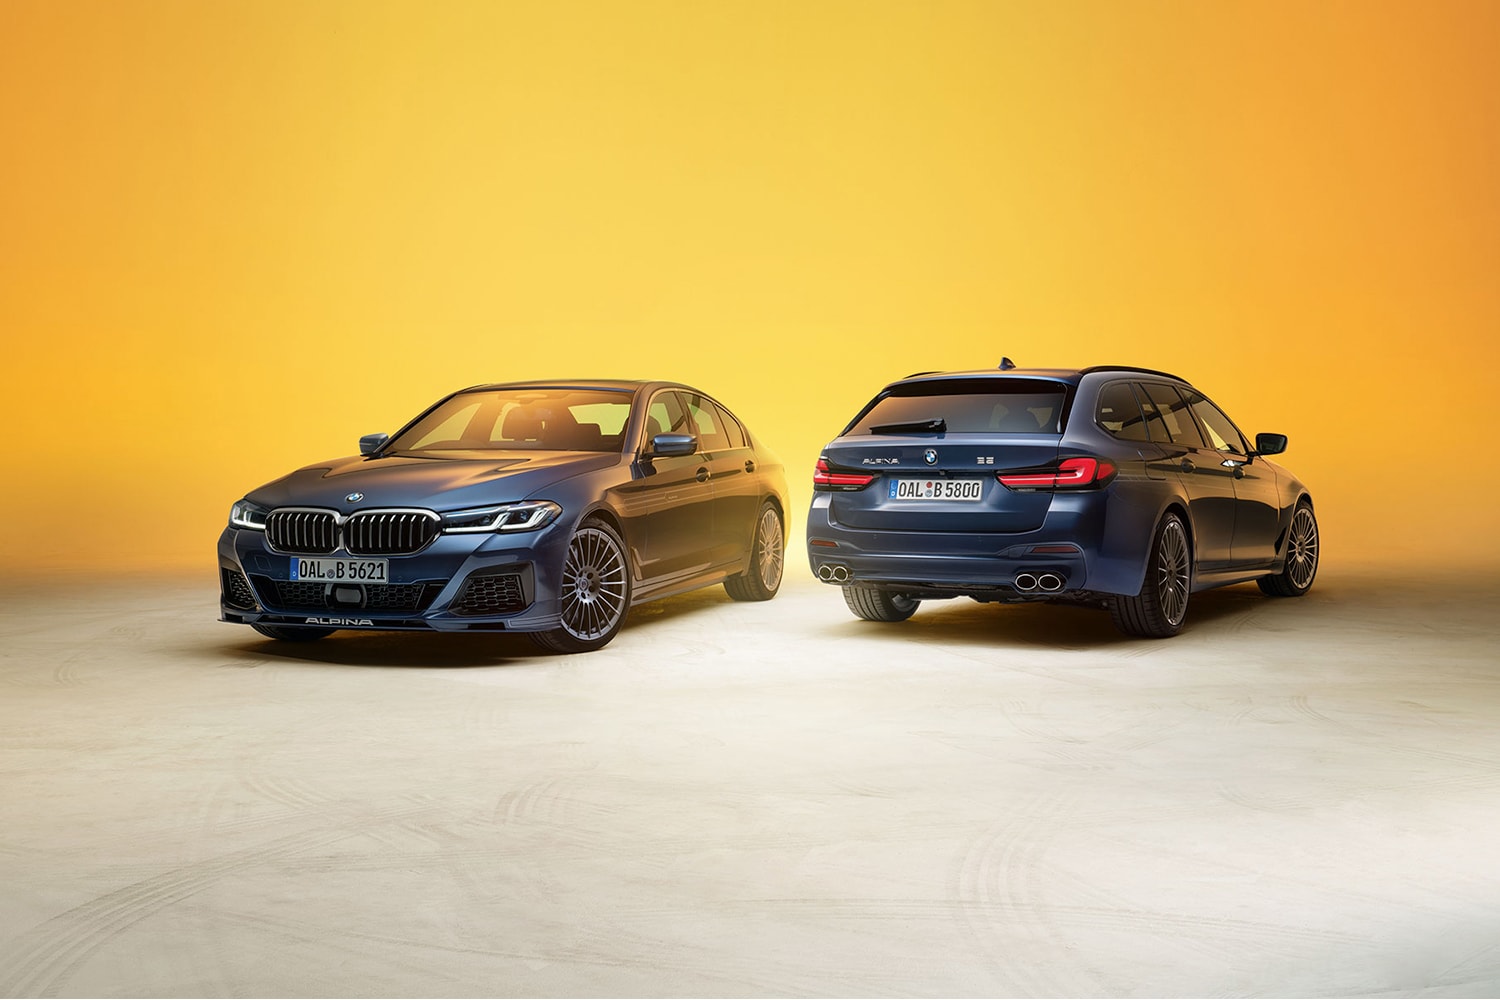 2020 BMW Alpina B5 and D5 S Reveal